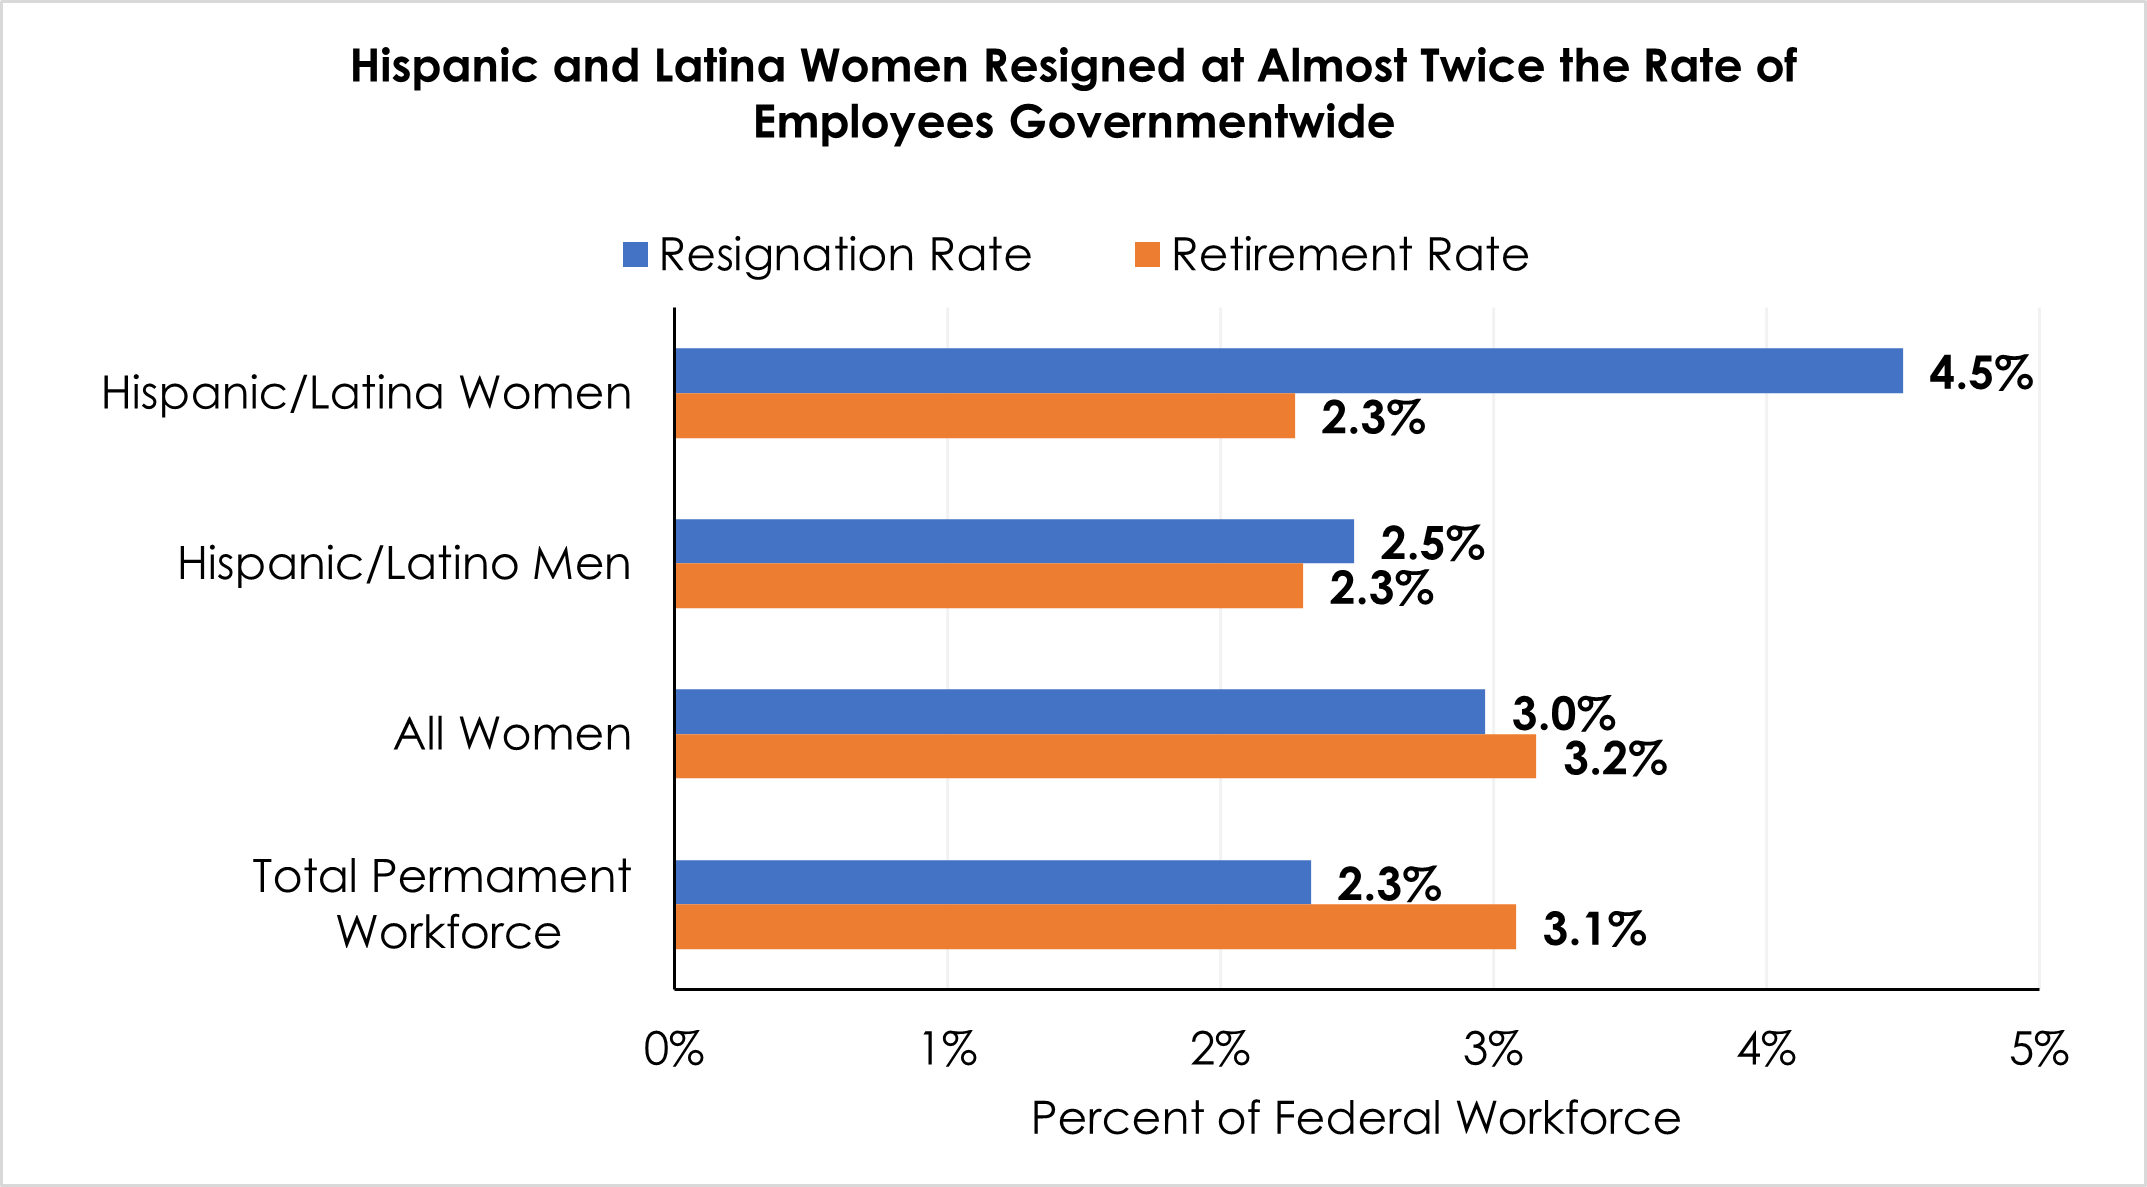 Figure 4 shows that Hispanic and Latina women resigned at almost twice the rate of employees governmentwide in fiscal year 2020.  3.1% federal employees retire.  2.3% federal employees resign.  3.2% Women retire in the federal sector.  3.0% Women resign in the federal sector.  2.3% Hispanic/Latino Men retire in the federal sector.  2.5% Hispanic/Latino Men resign in the federal sector.  2.3% Hispanic/Latina Women retire in the federal sector.  4.5% Hispanic/Latina Women resign in the federal sector.